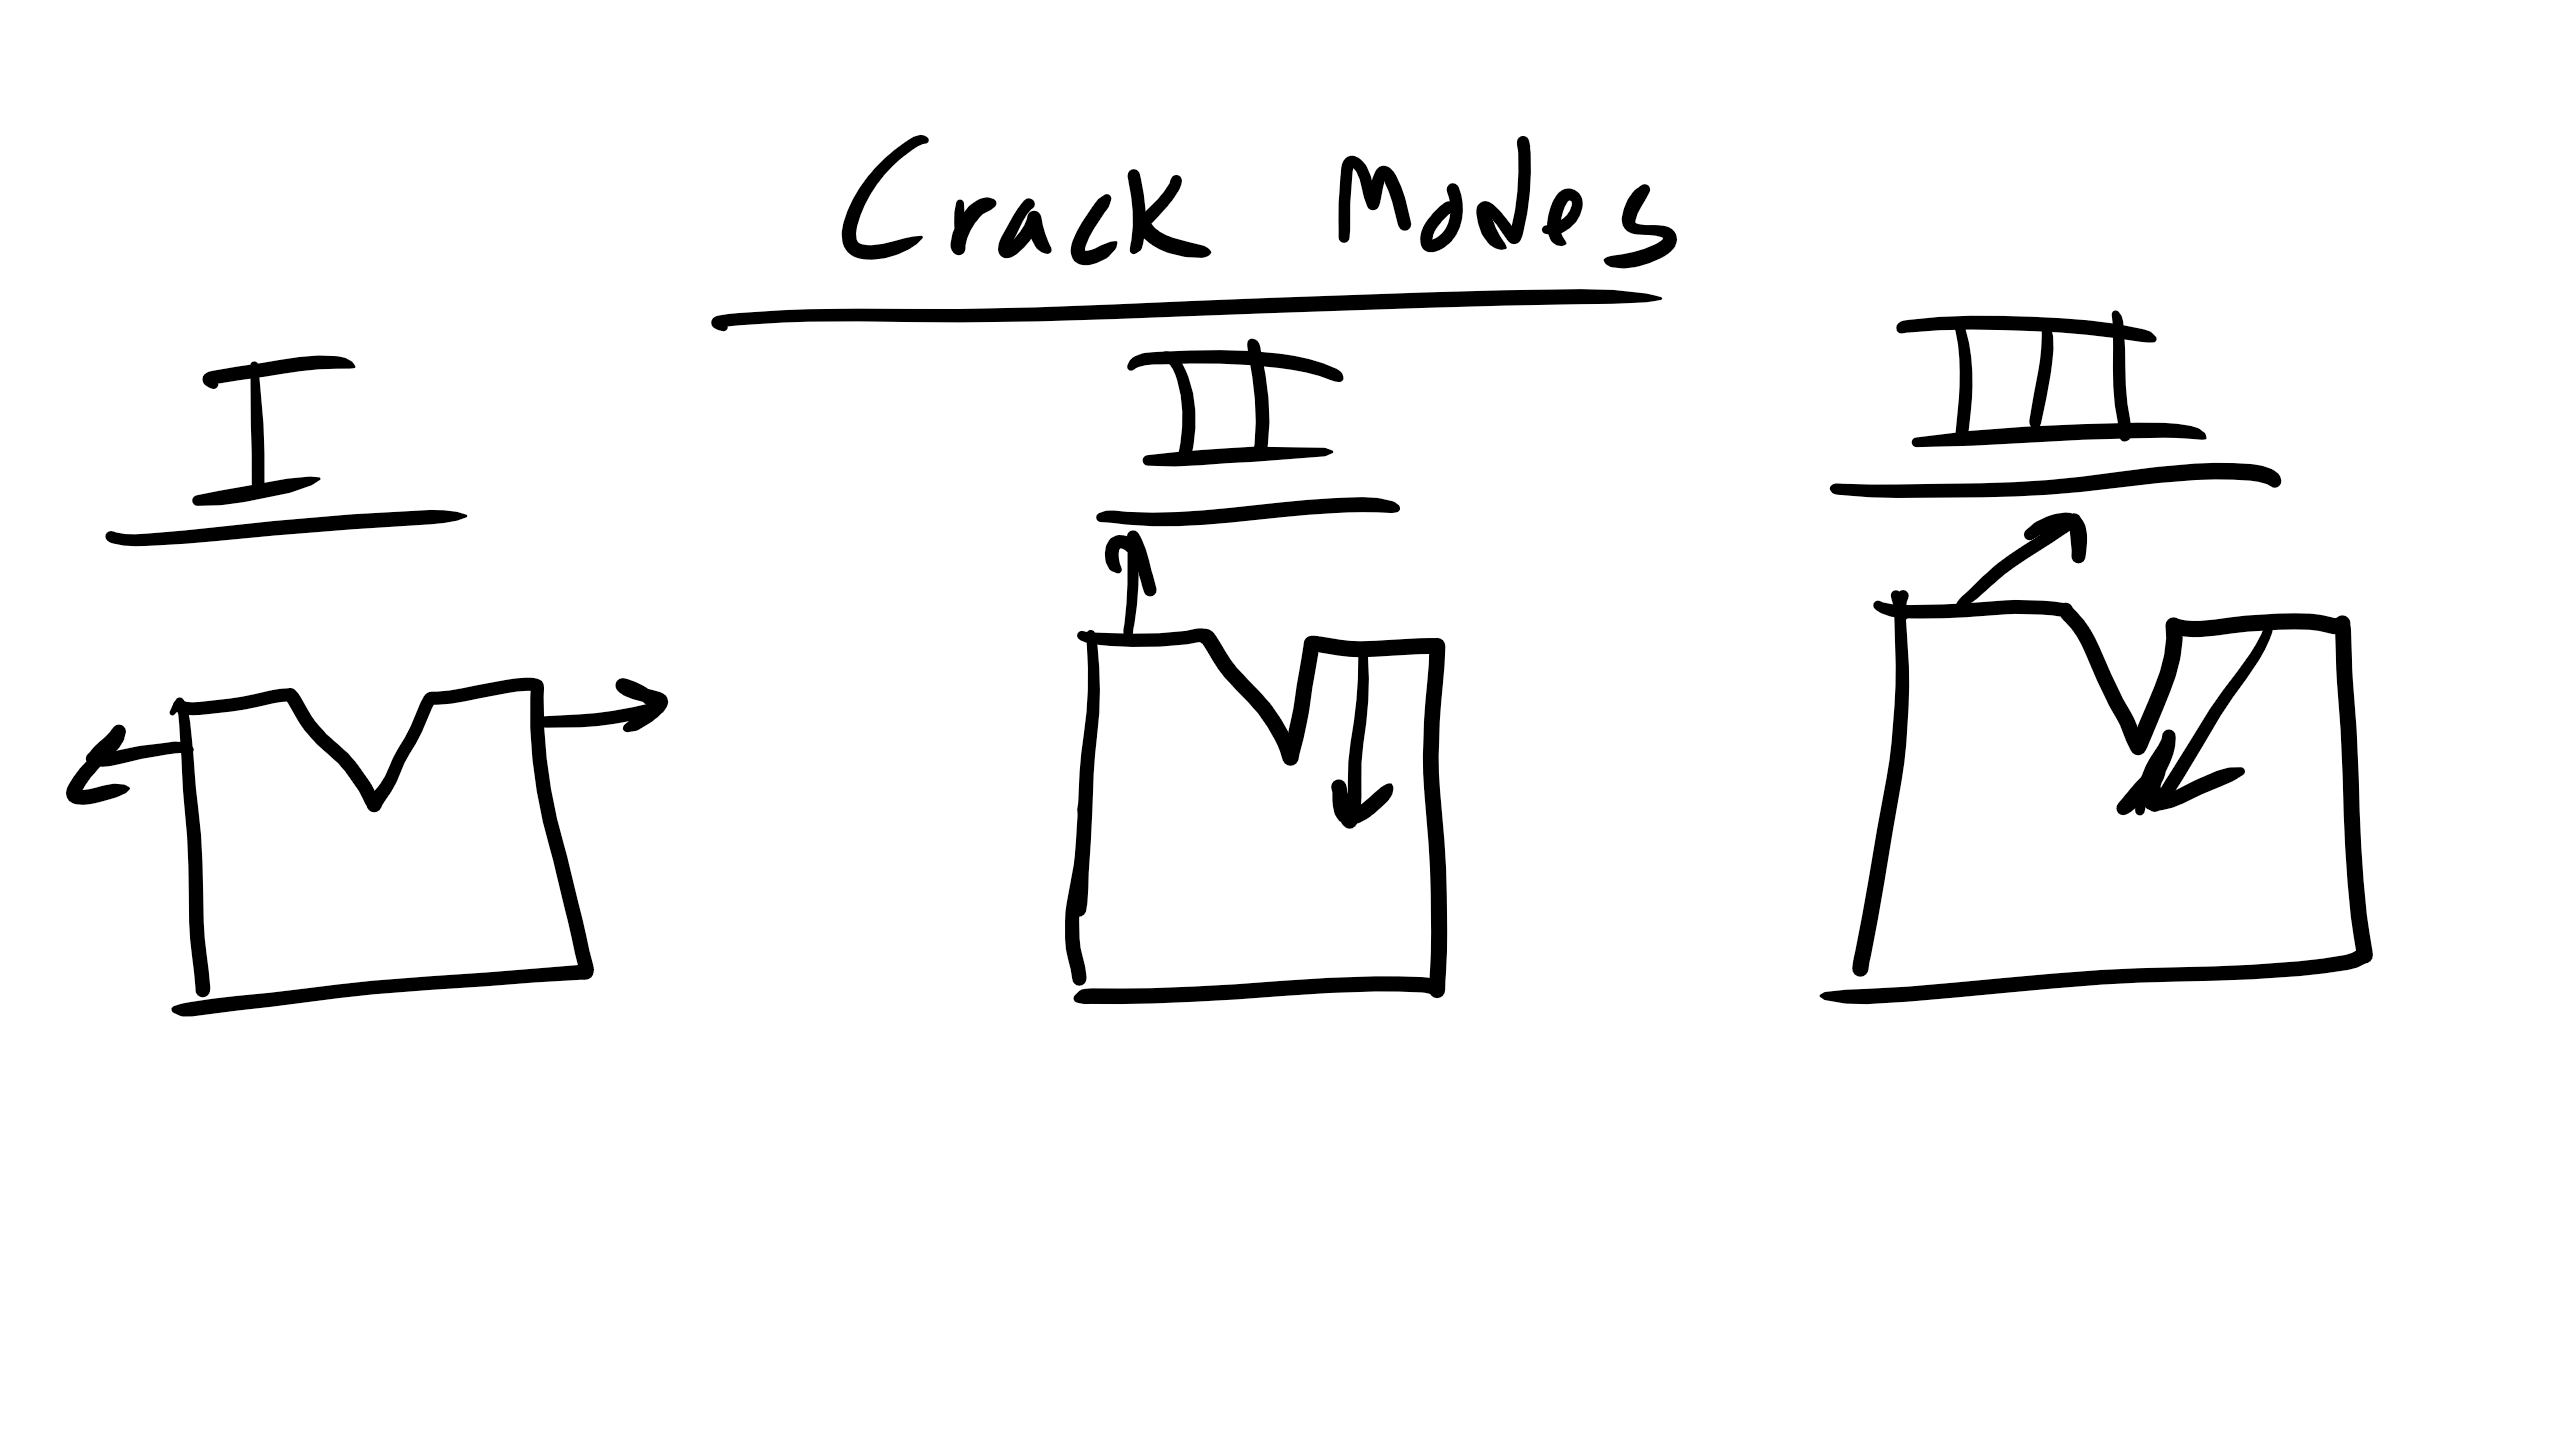 crackmodes.png